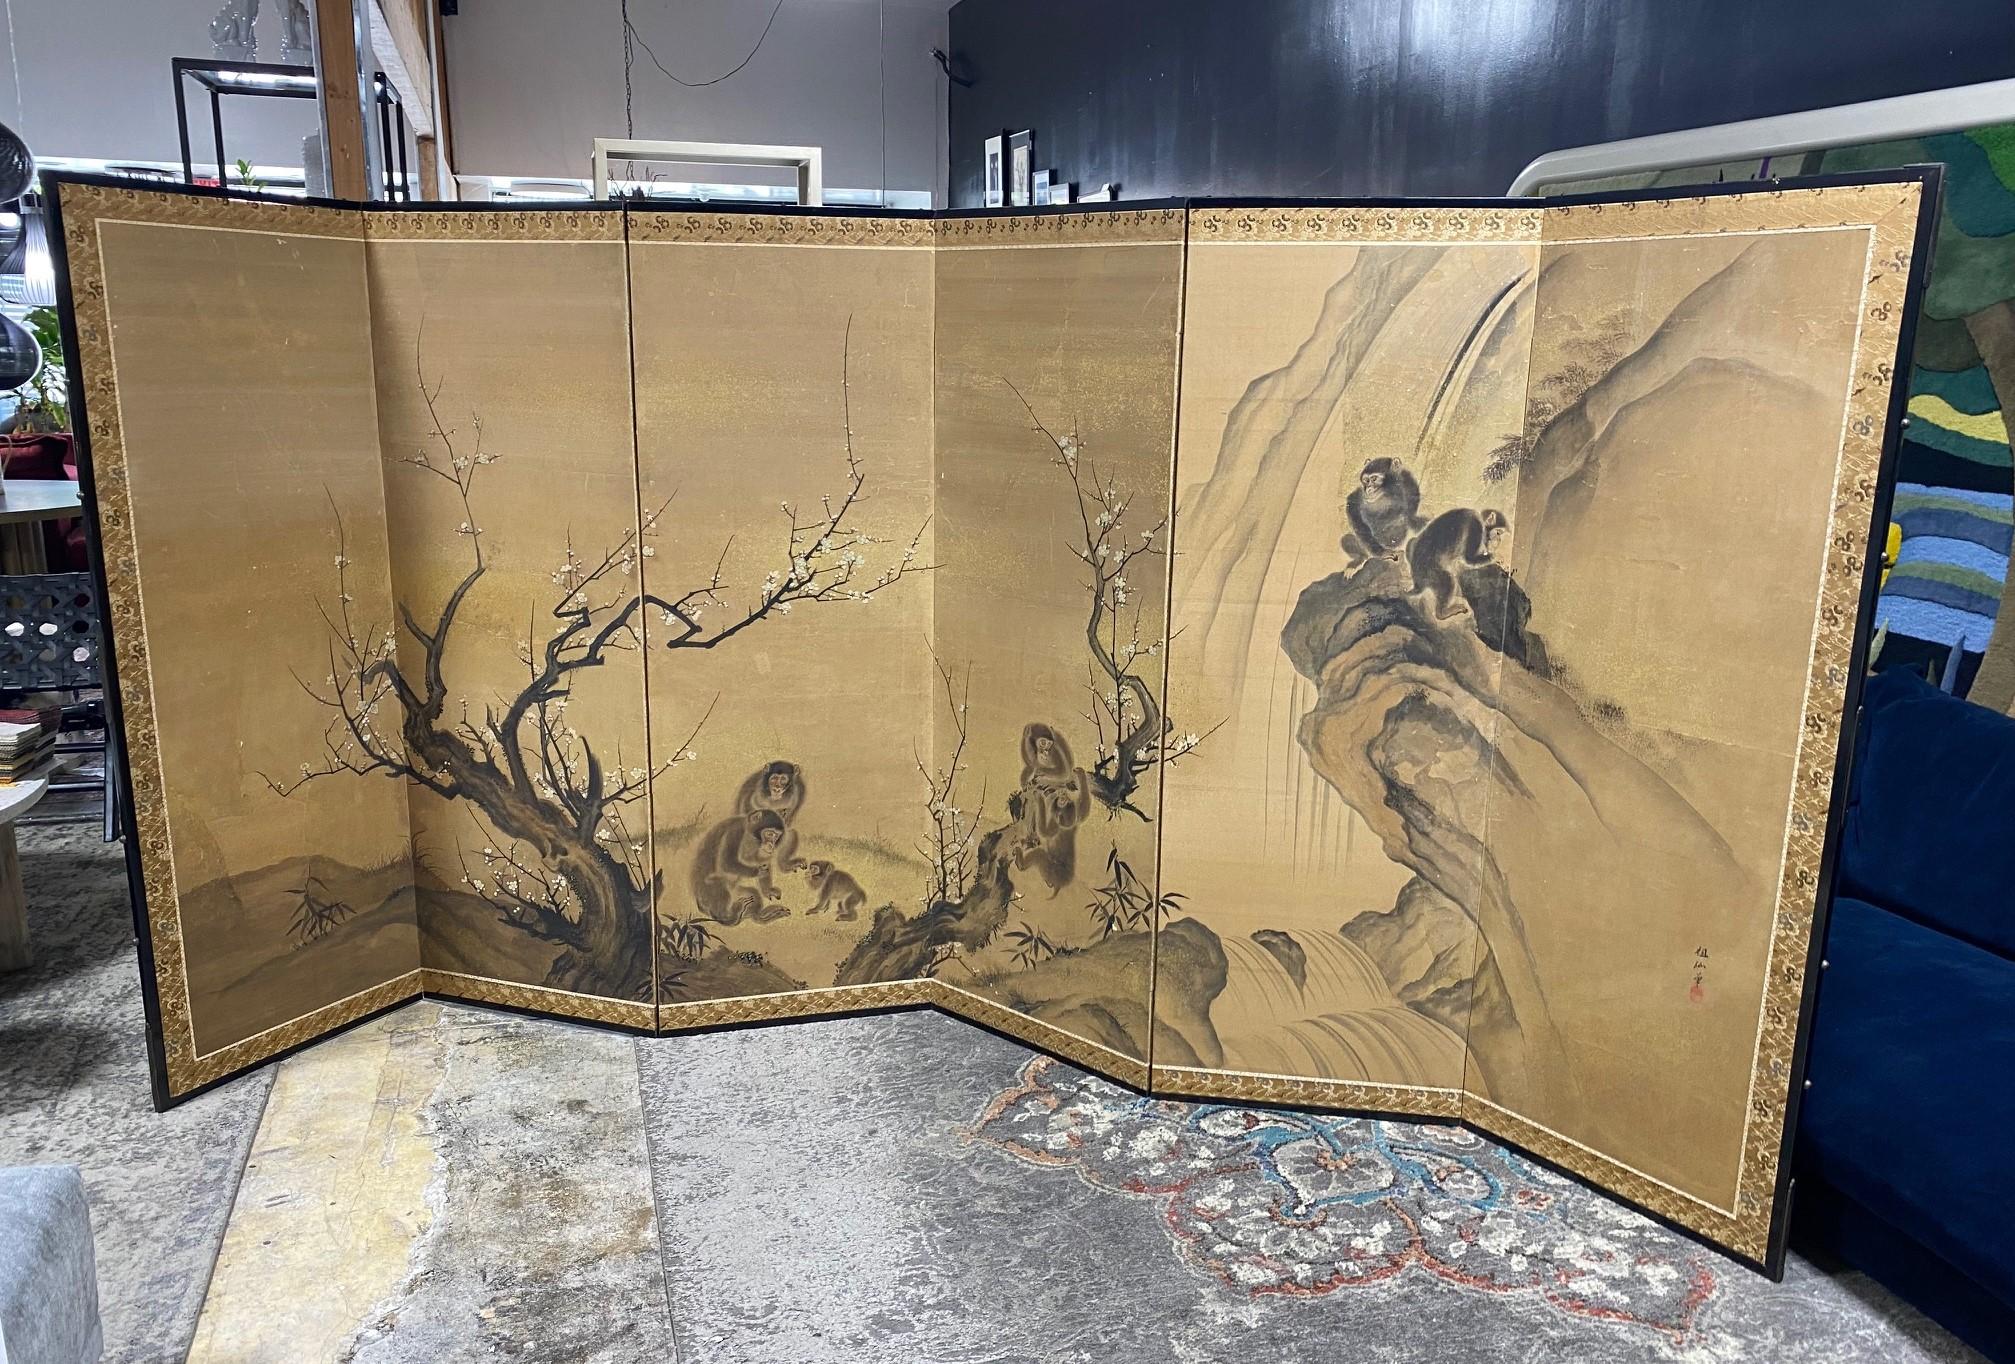 An absolutely gorgeous, wonderfully composed six-panel Japanese byobu folding screen / room divider depicting a family of playful monkeys among the blooming trees and mountainous landscape. The beautiful hand painted detail really makes this an